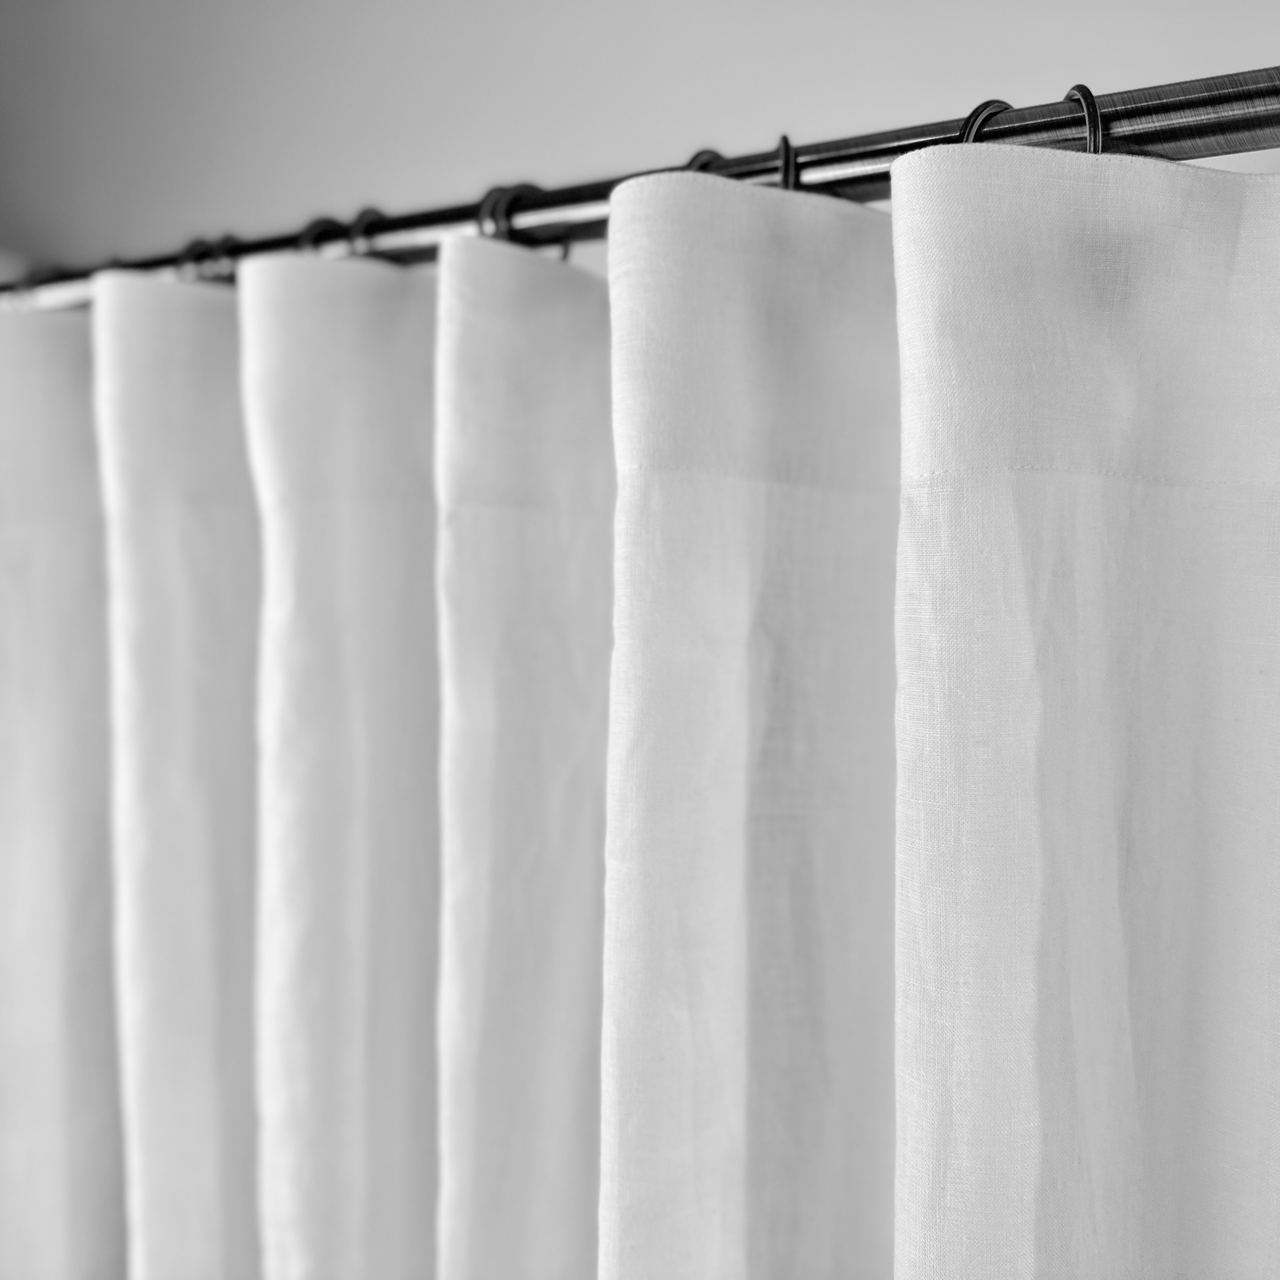 S-Fold Linen Curtain Panel with Cotton Lining - Suitable for Rings and Hooks or Track